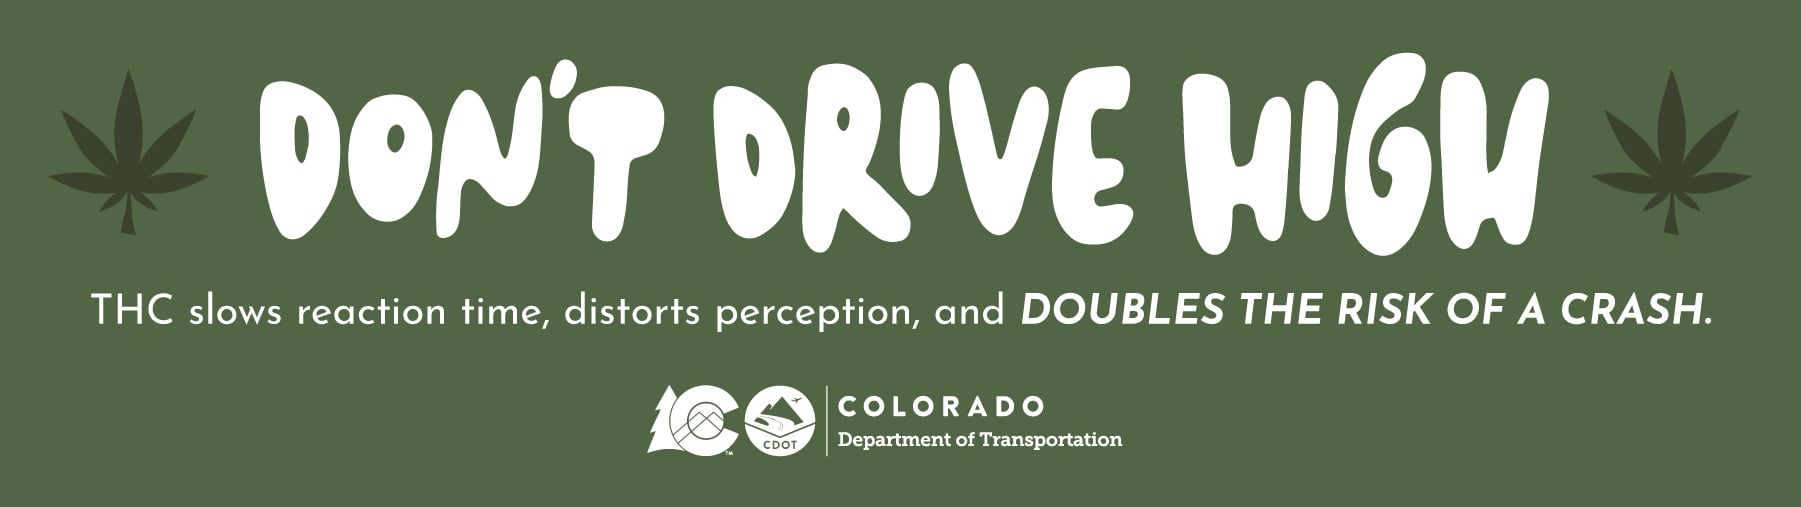 Don't Drive High  THC slows reaction time, distorts perception, and doubles the risk of a crash.  Colorado Department of Transportation